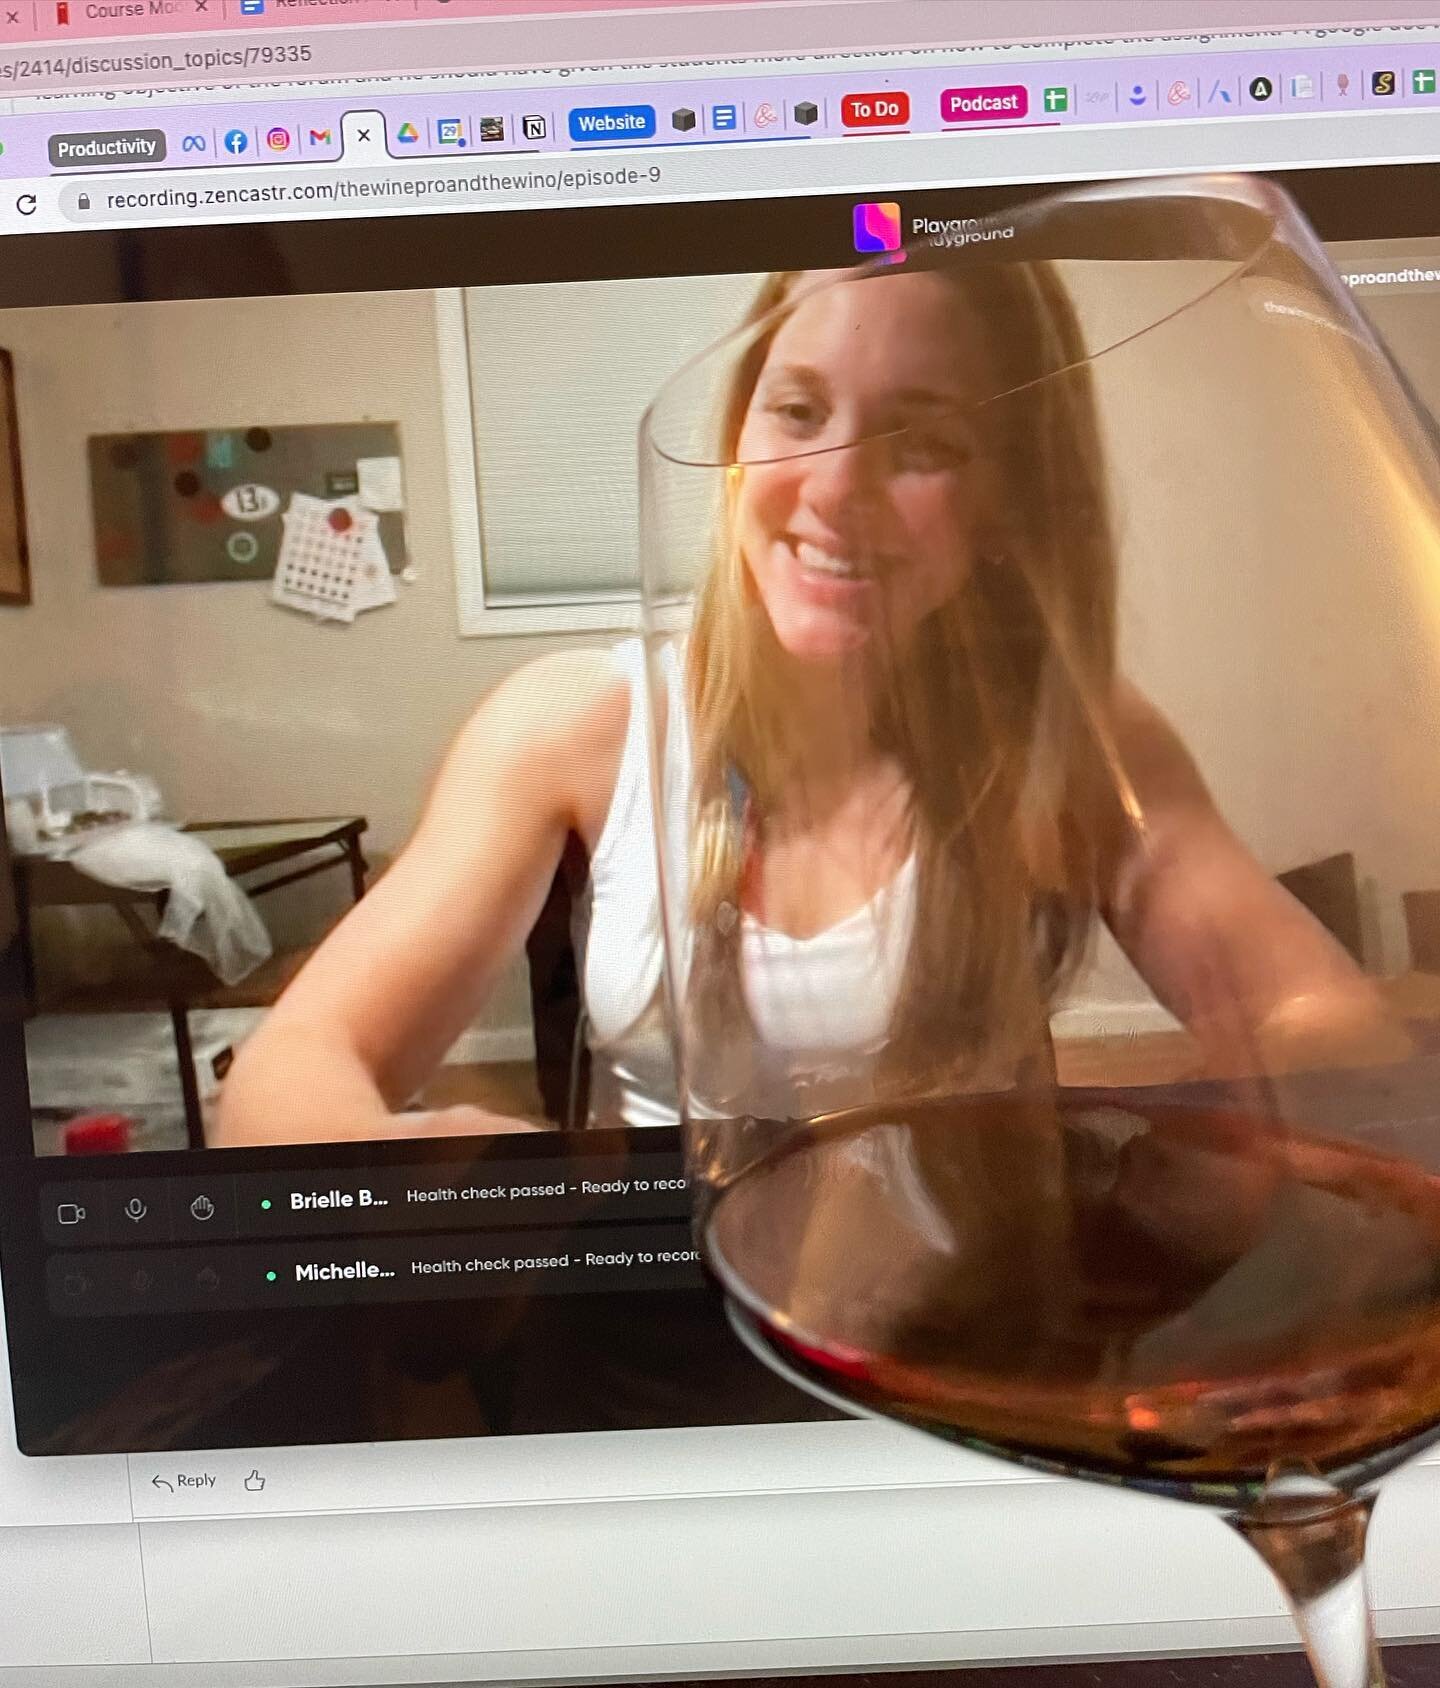 Most of the time, our podcast recording sessions look like this &mdash; a million tabs open (or maybe that&rsquo;s just Brielle&hellip;), a glass of wine in hand, and our central question of the day. We&rsquo;ve really gotten into a rhythm!

Michelle